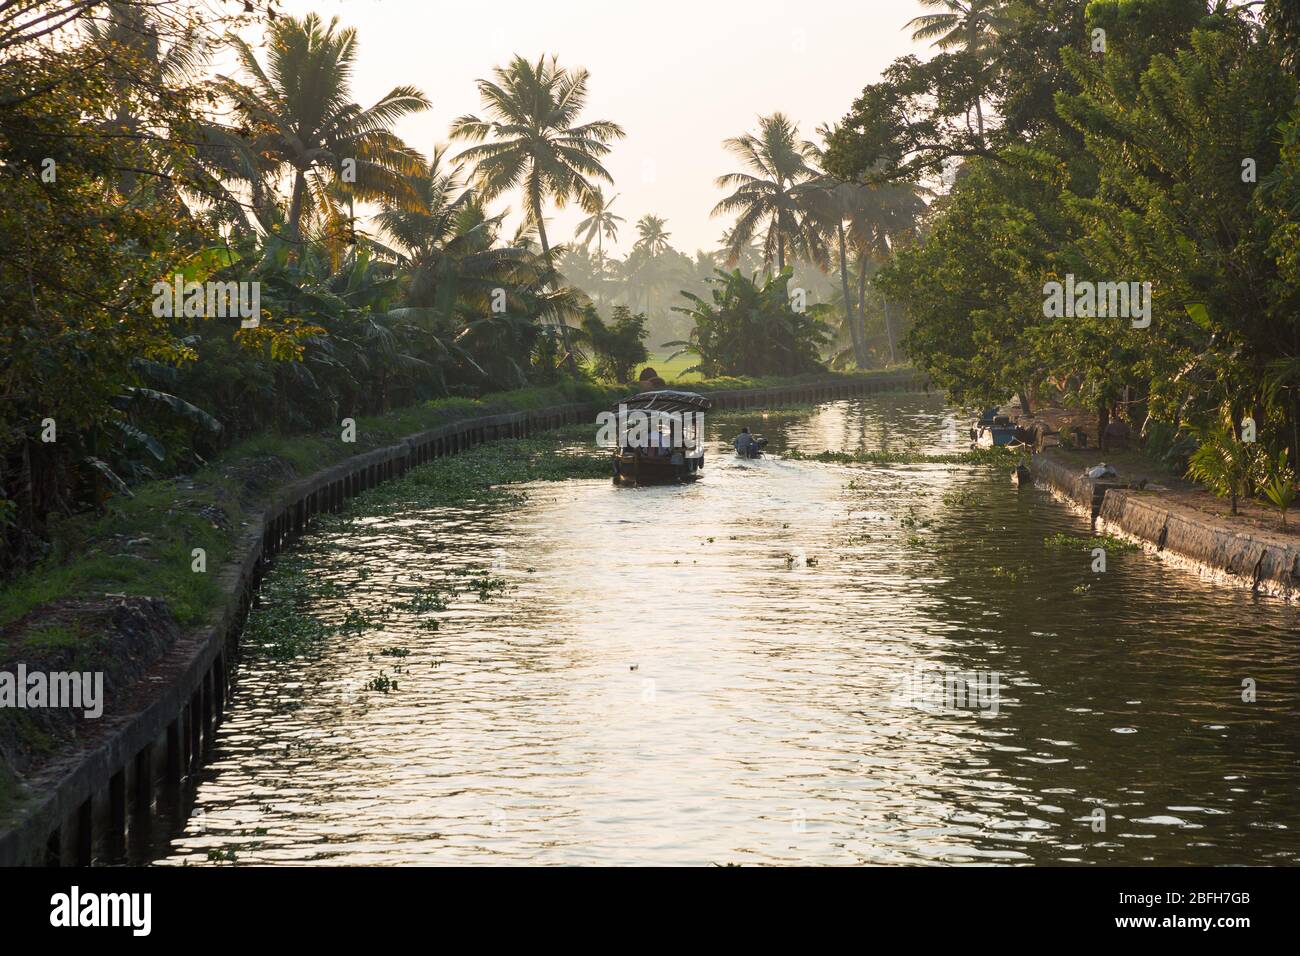 Alleppey, Kerala - January 6, 2019: boats in a canal in alleppey backwaters kerala india Stock Photo